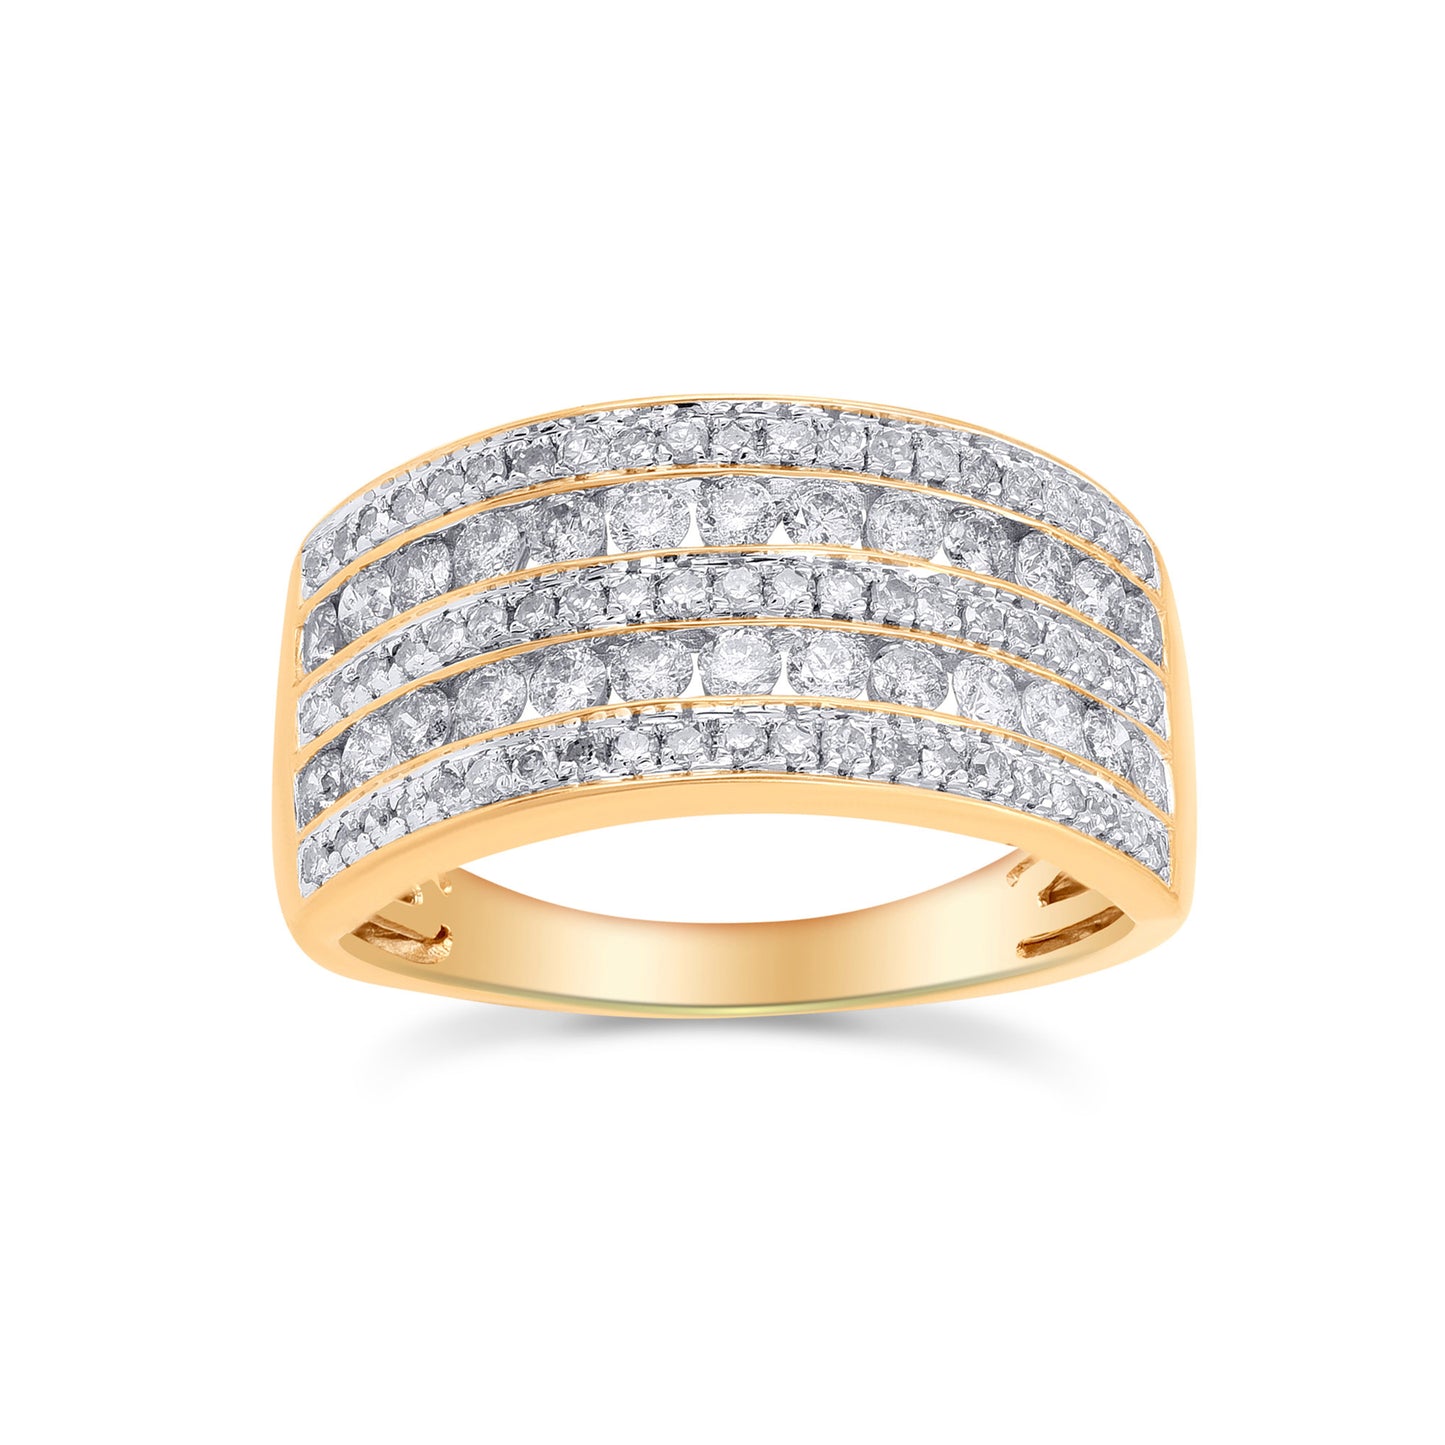 Multi-Row Stackable Wedding Band in 10K Gold